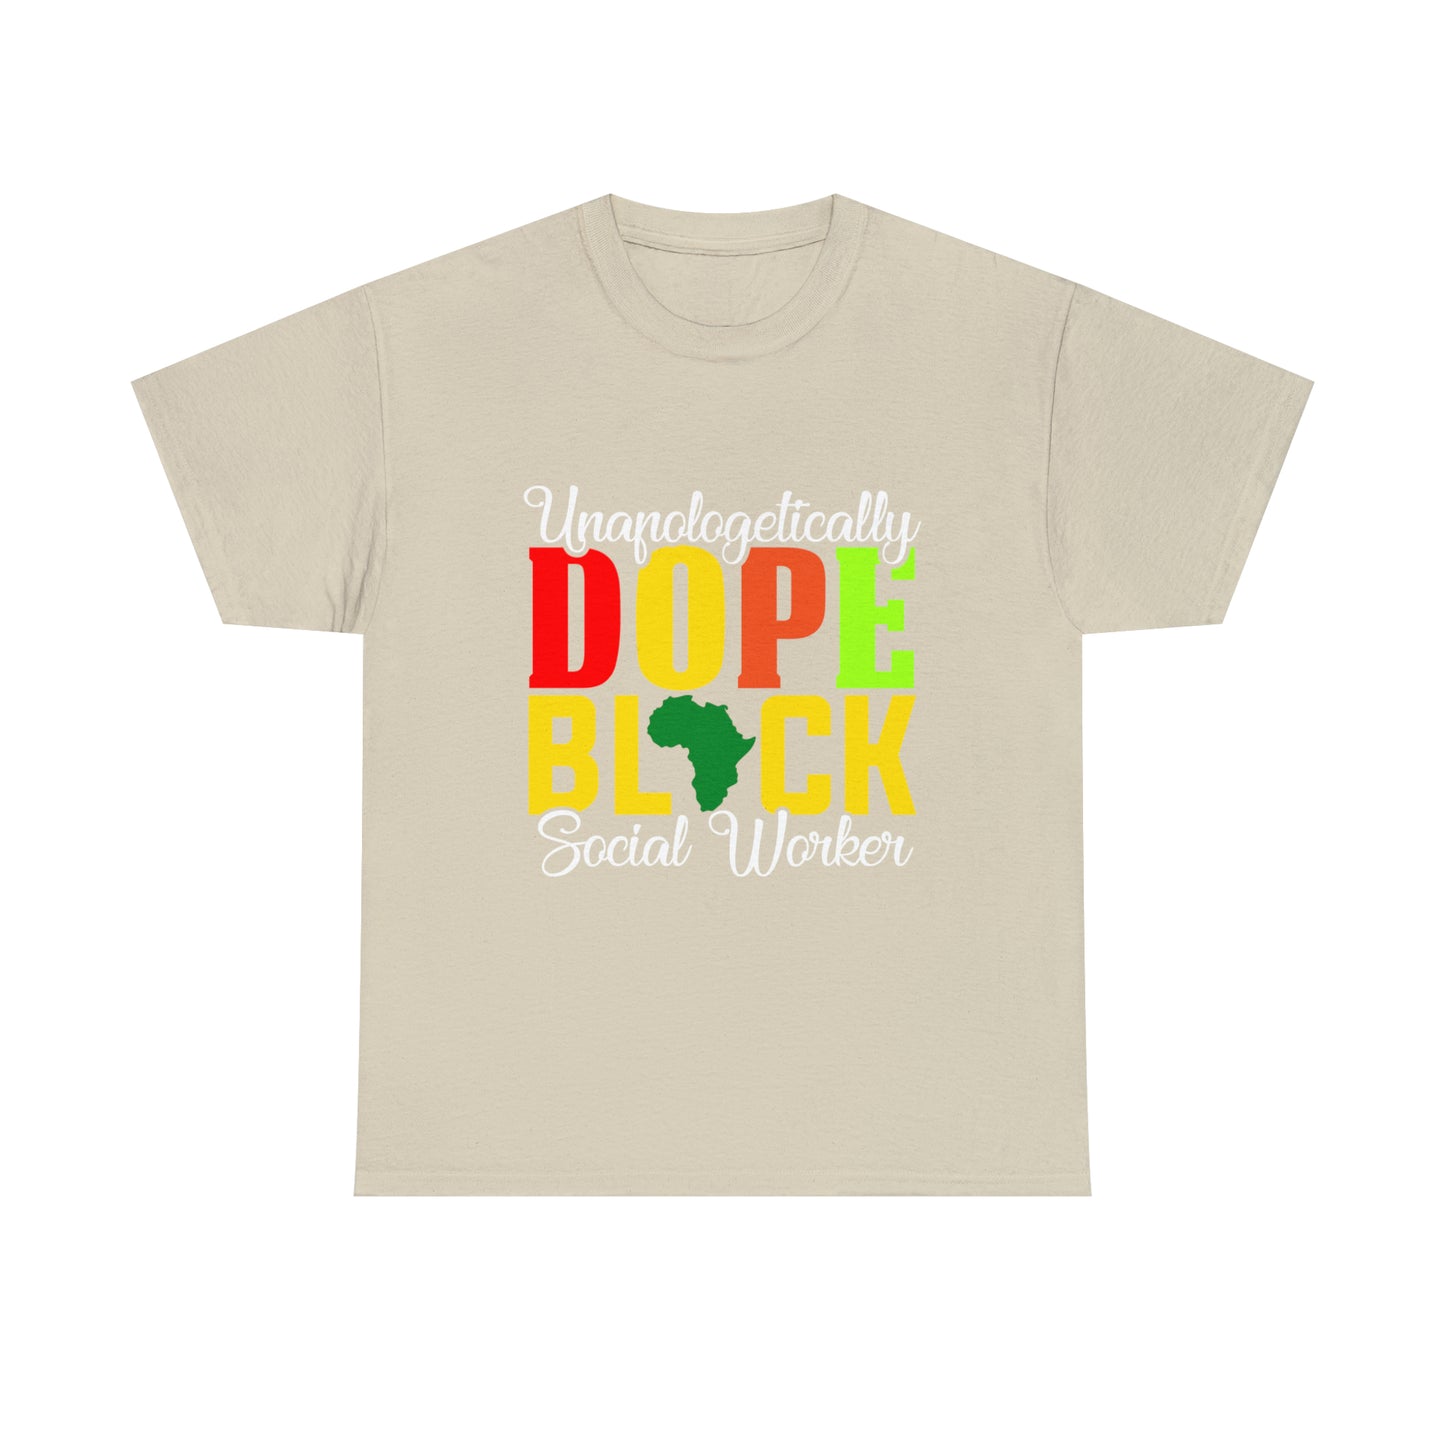 Unapologetically Dope Black Social Worker, Social Work Gift, MSW Gift, LMSW Shirt, LCSW Shirt, Advocate Shirt